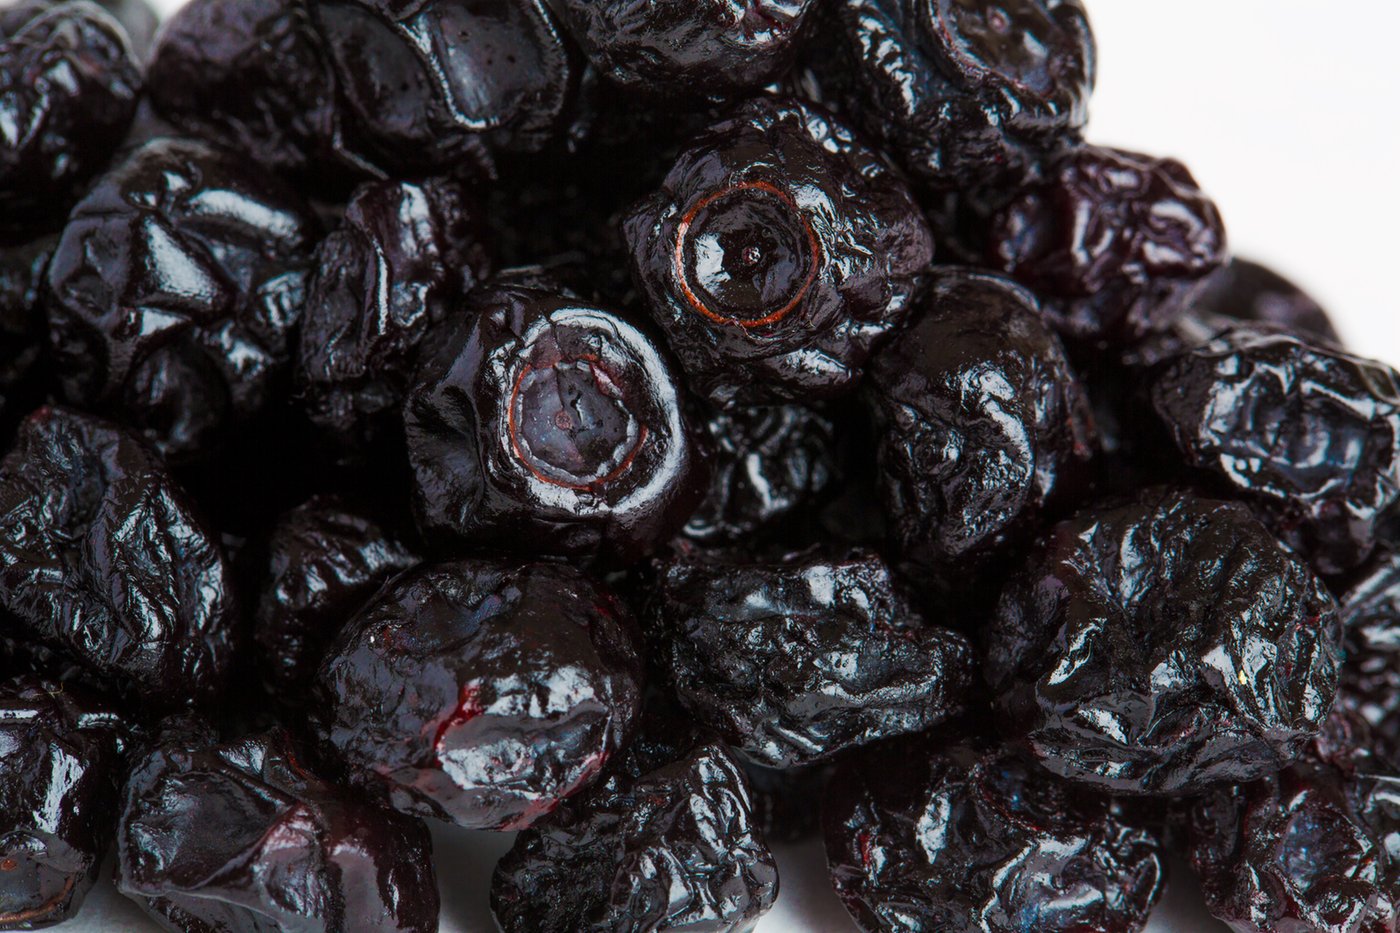 Dried Blueberries photo